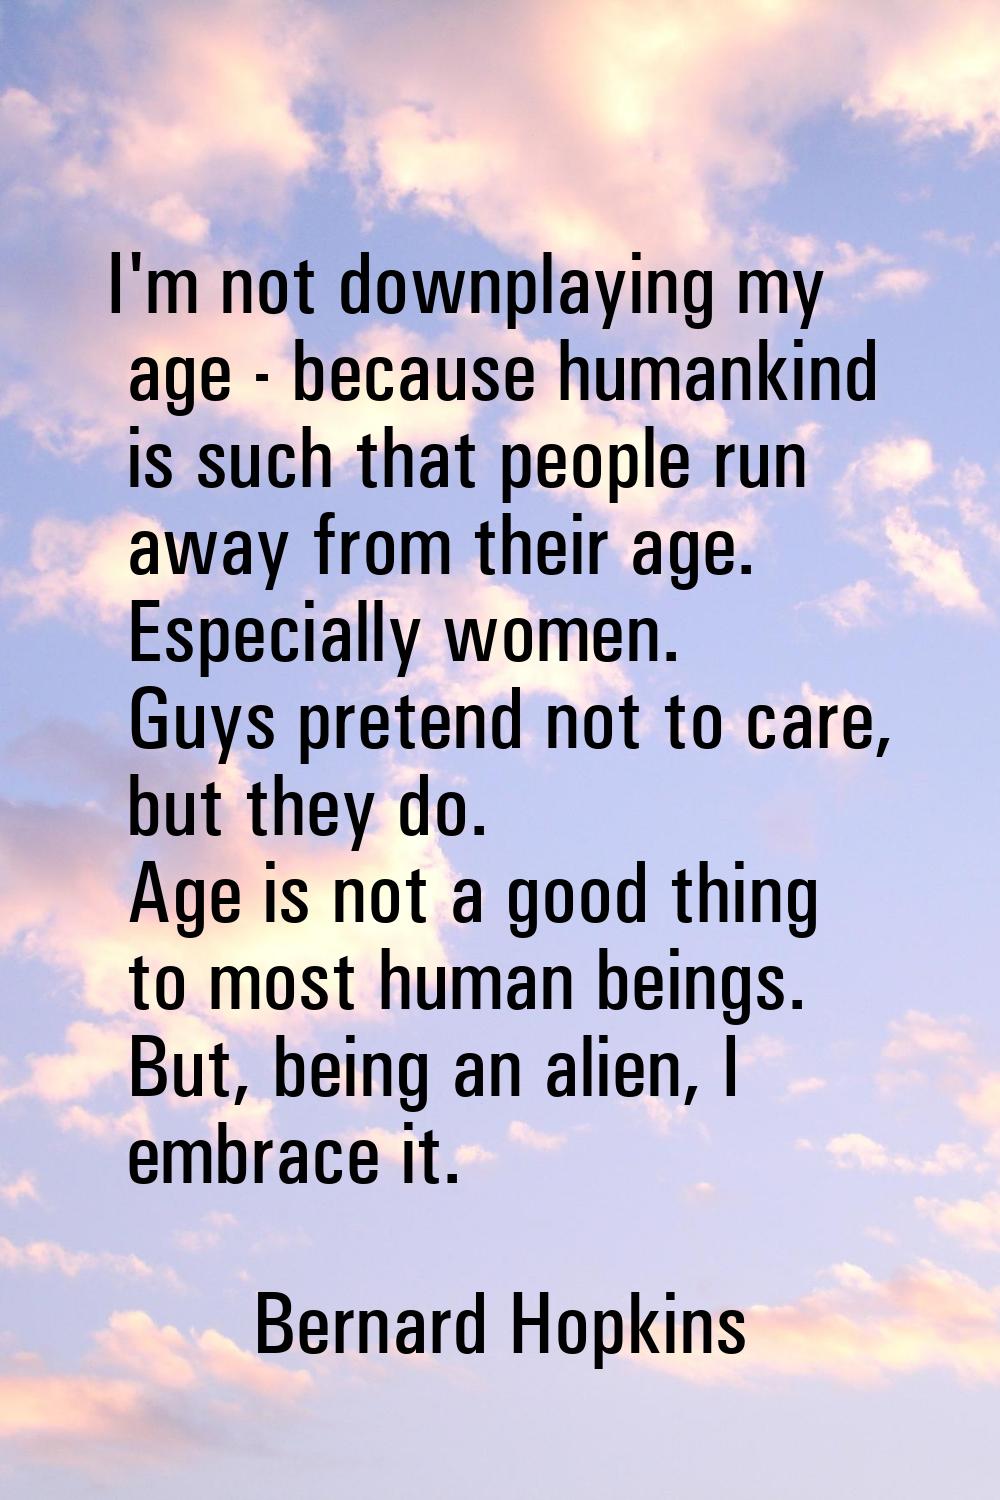 I'm not downplaying my age - because humankind is such that people run away from their age. Especia